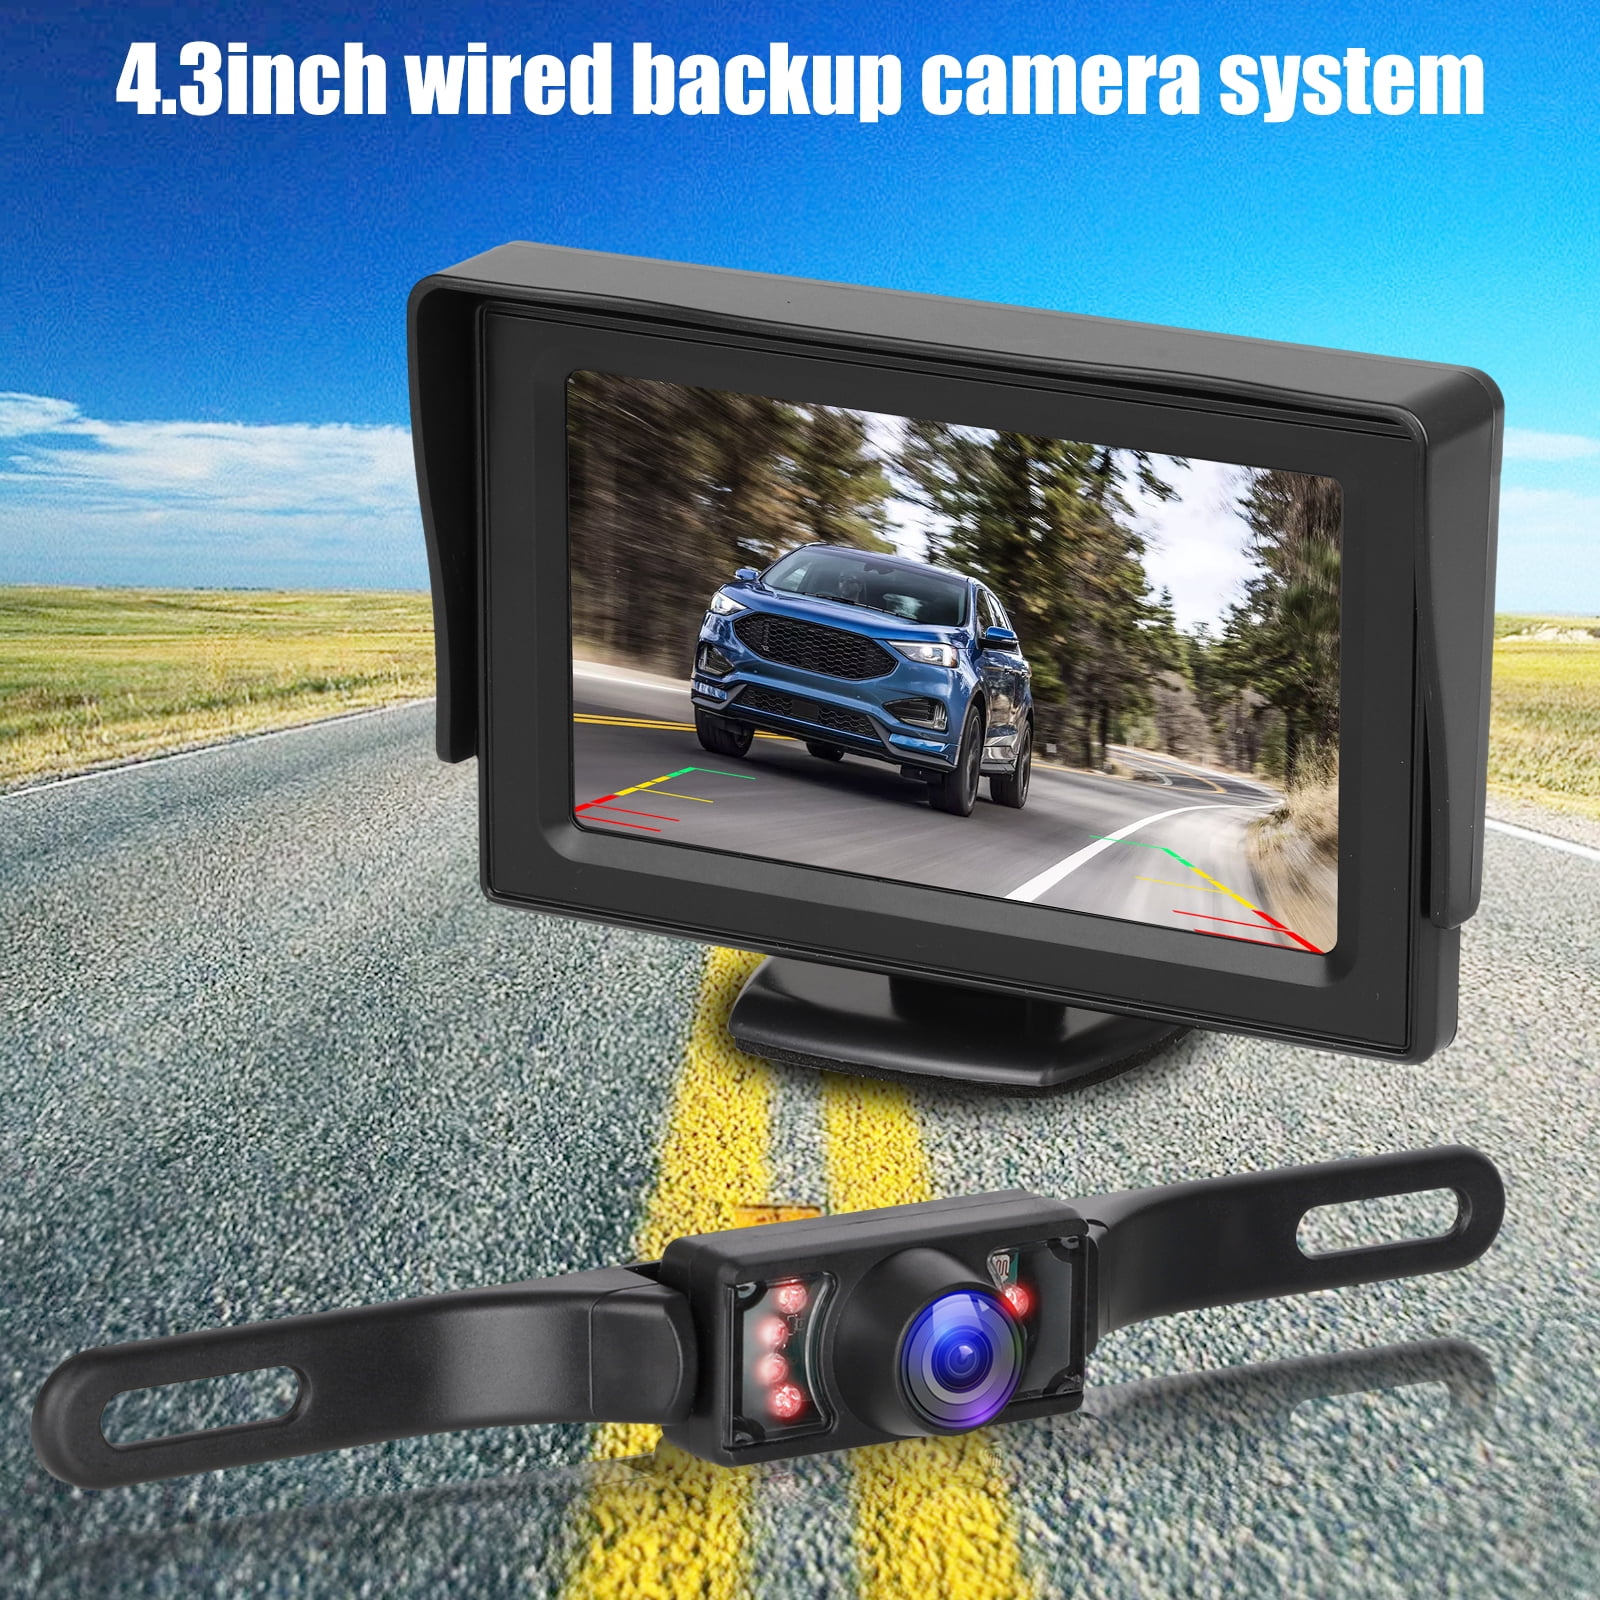 Regetek 4.3 HD 1080P Digital Backup Camera System LCD Monitor with License Plate Rear/Front View Camera Observation System for Cars SUV Van Mini RV Waterproof Super Night Vision DIY Grid Lines 